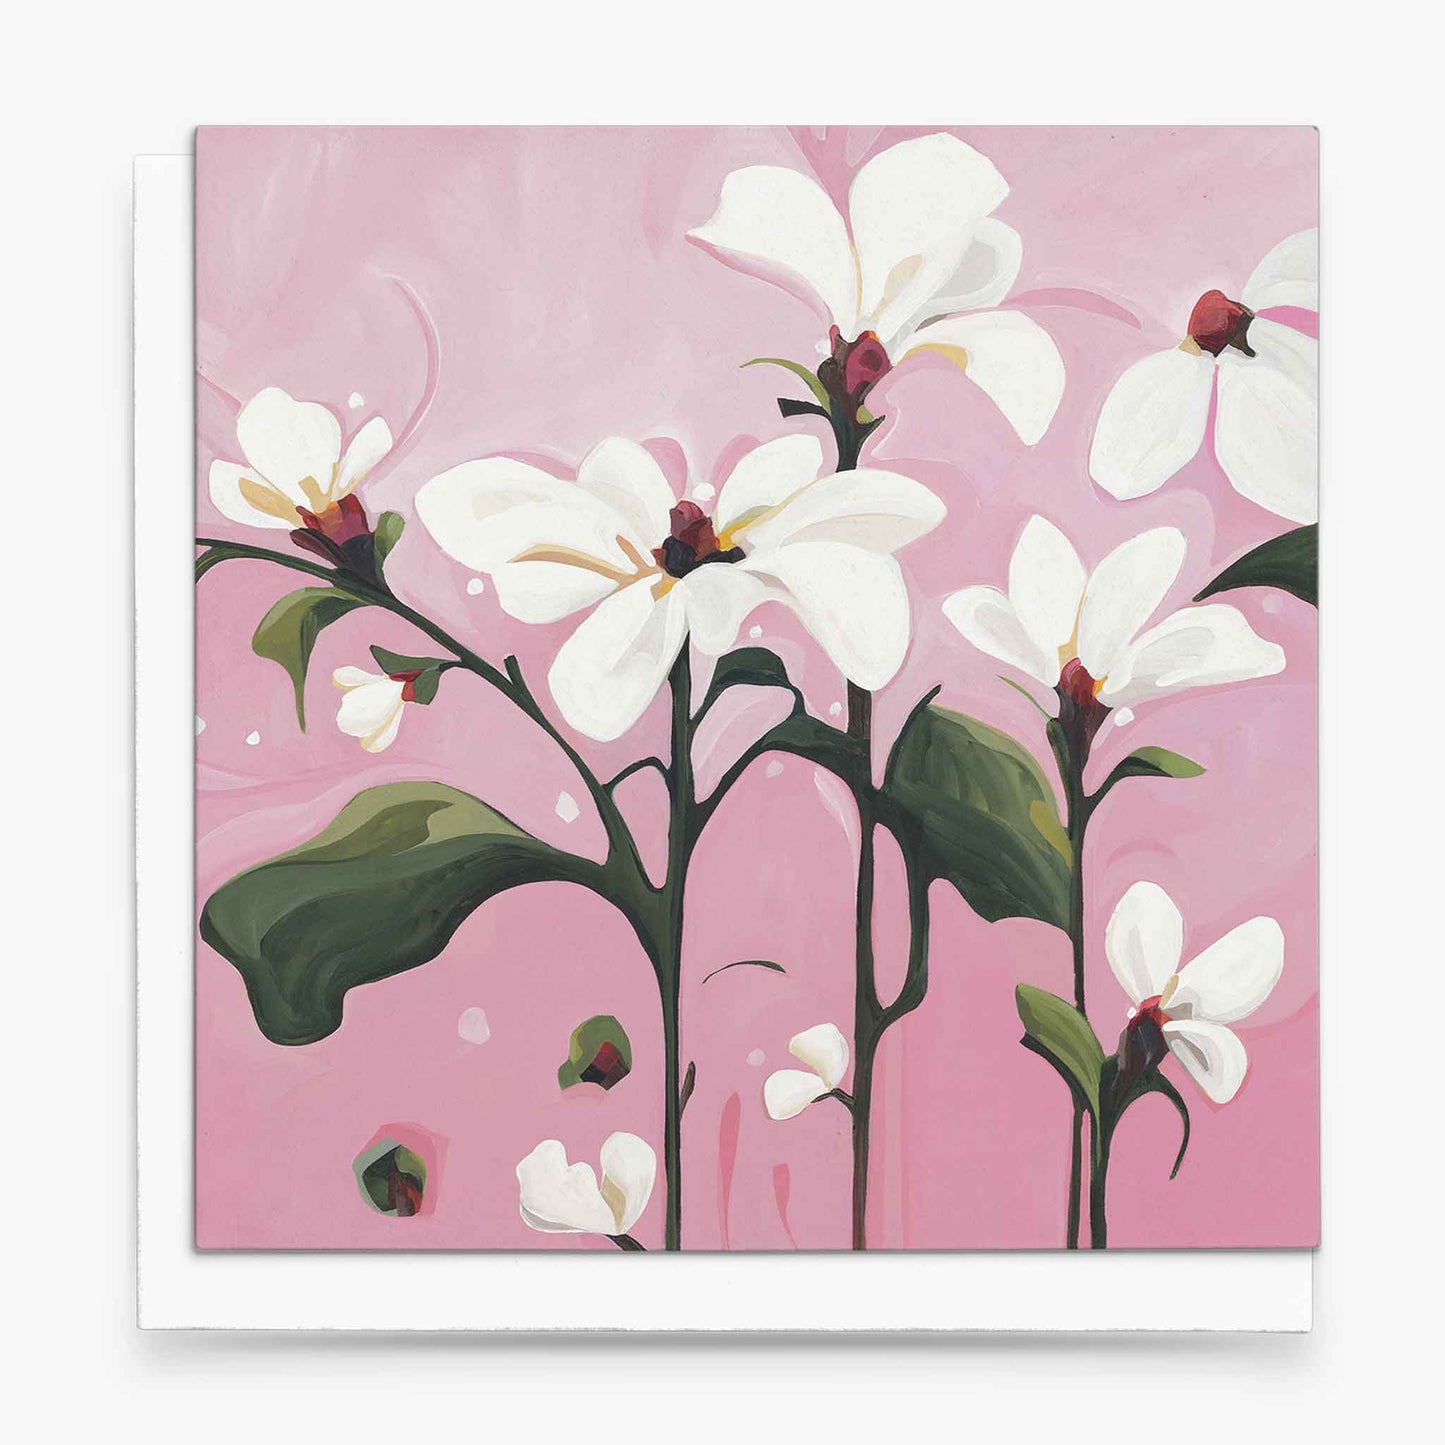 pink card with flowers